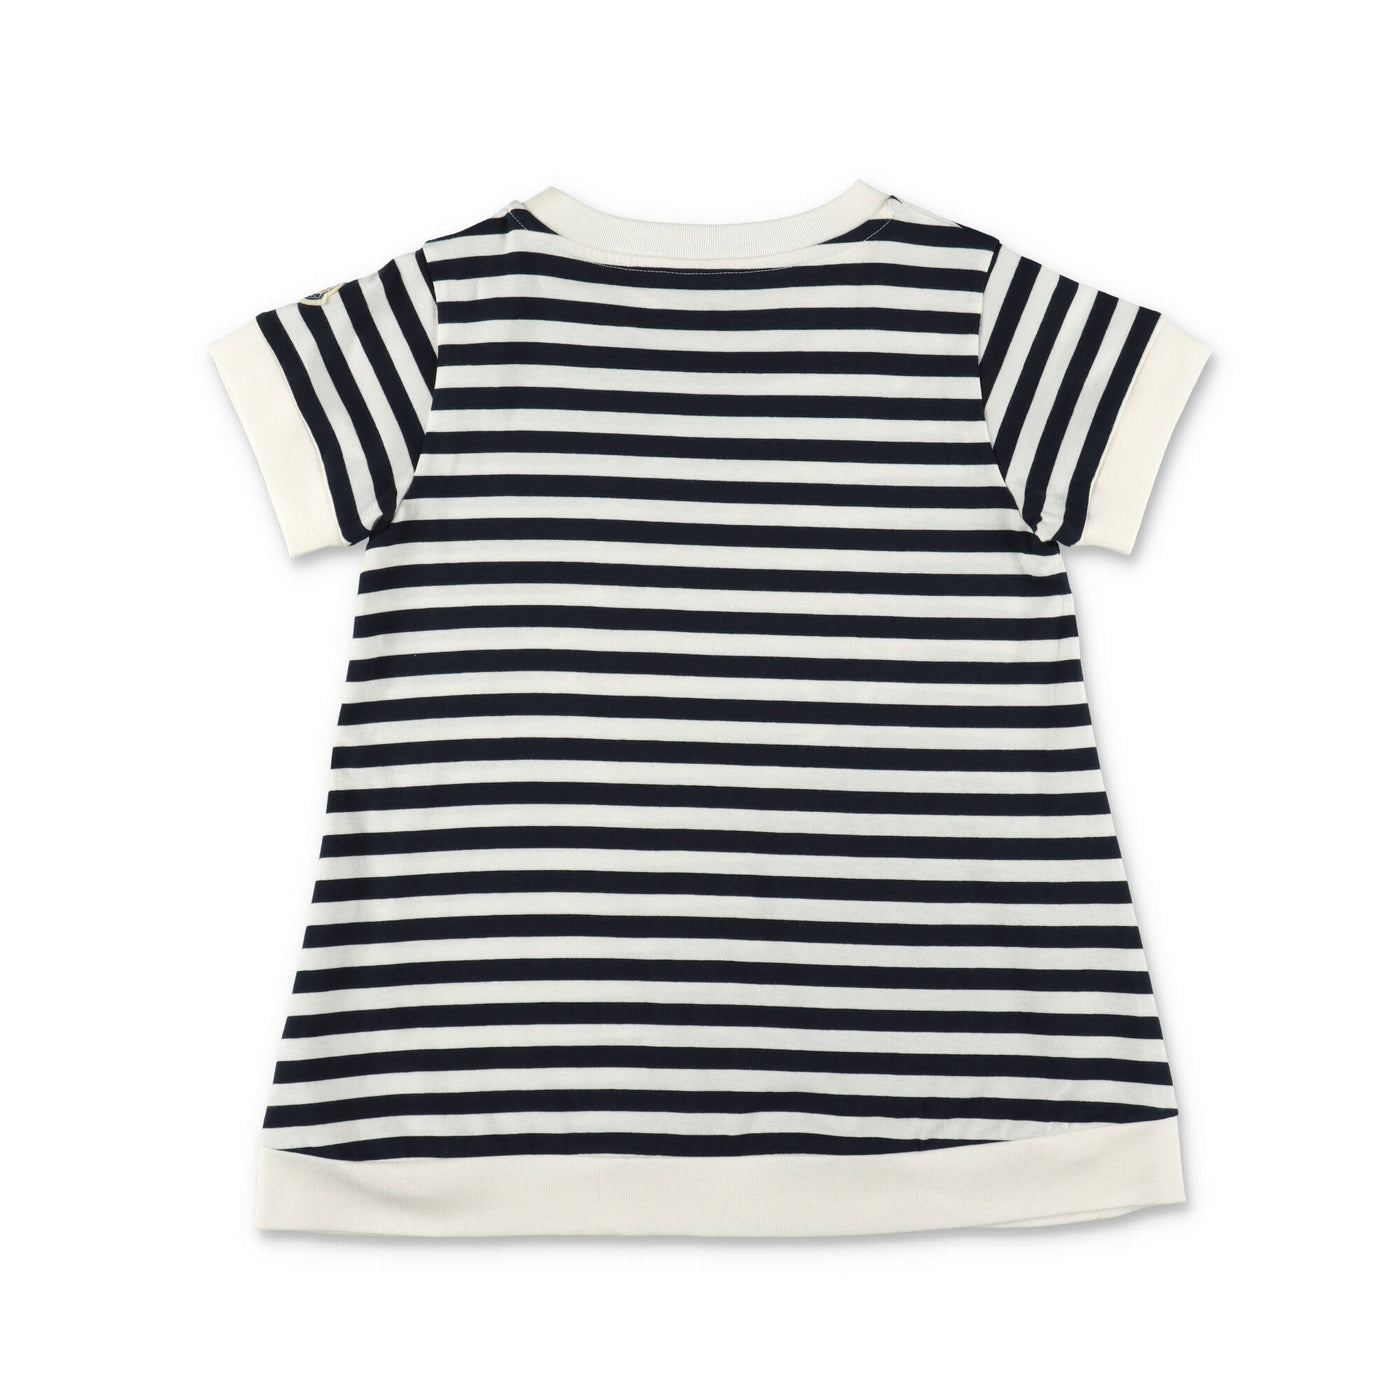 Blue and white striped cotton jersey girl MONCLER t-shirt